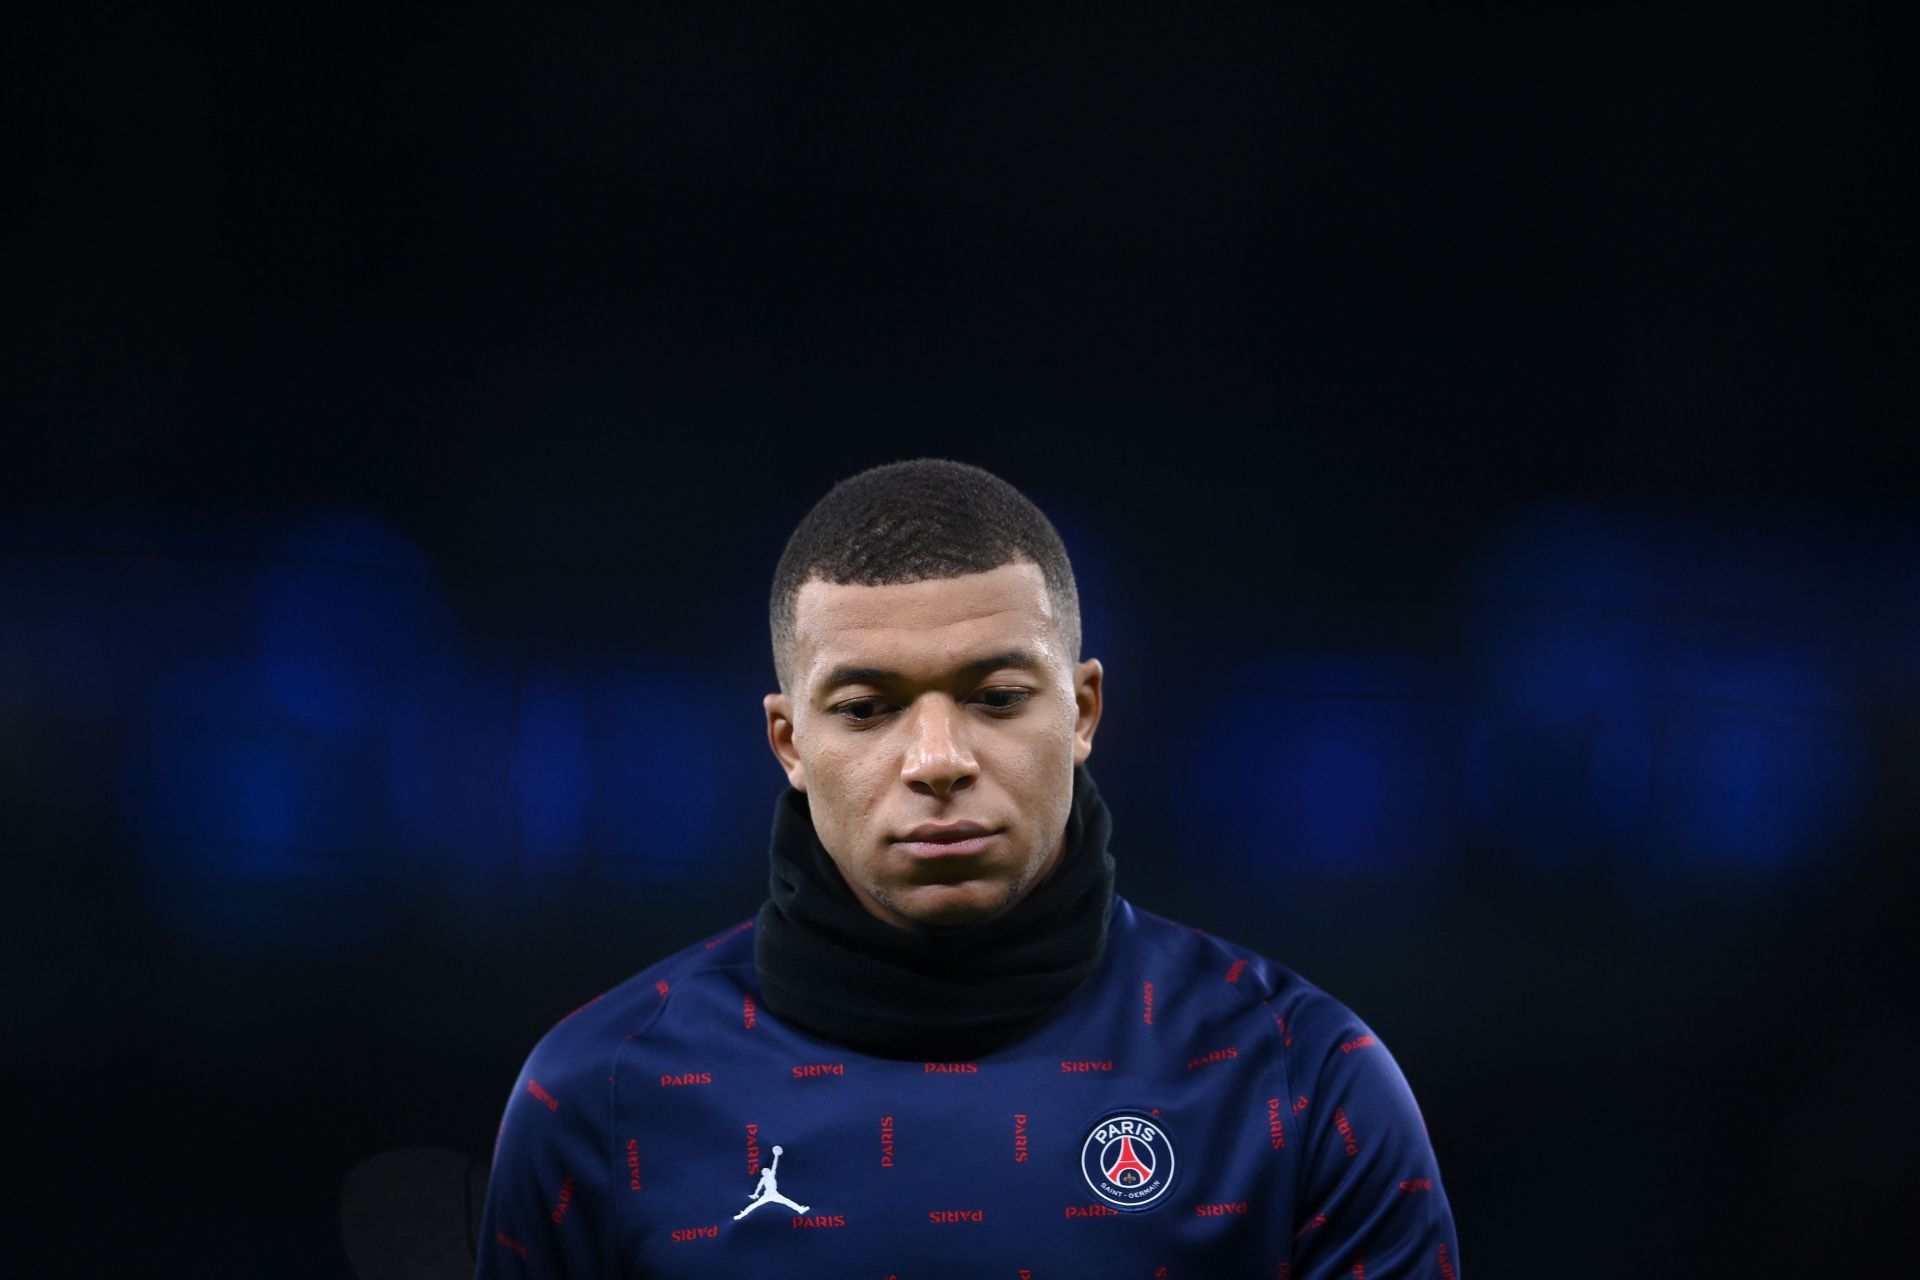 Kylian Mbappe is set to earn &euro;50 million per year at Real Madrid.